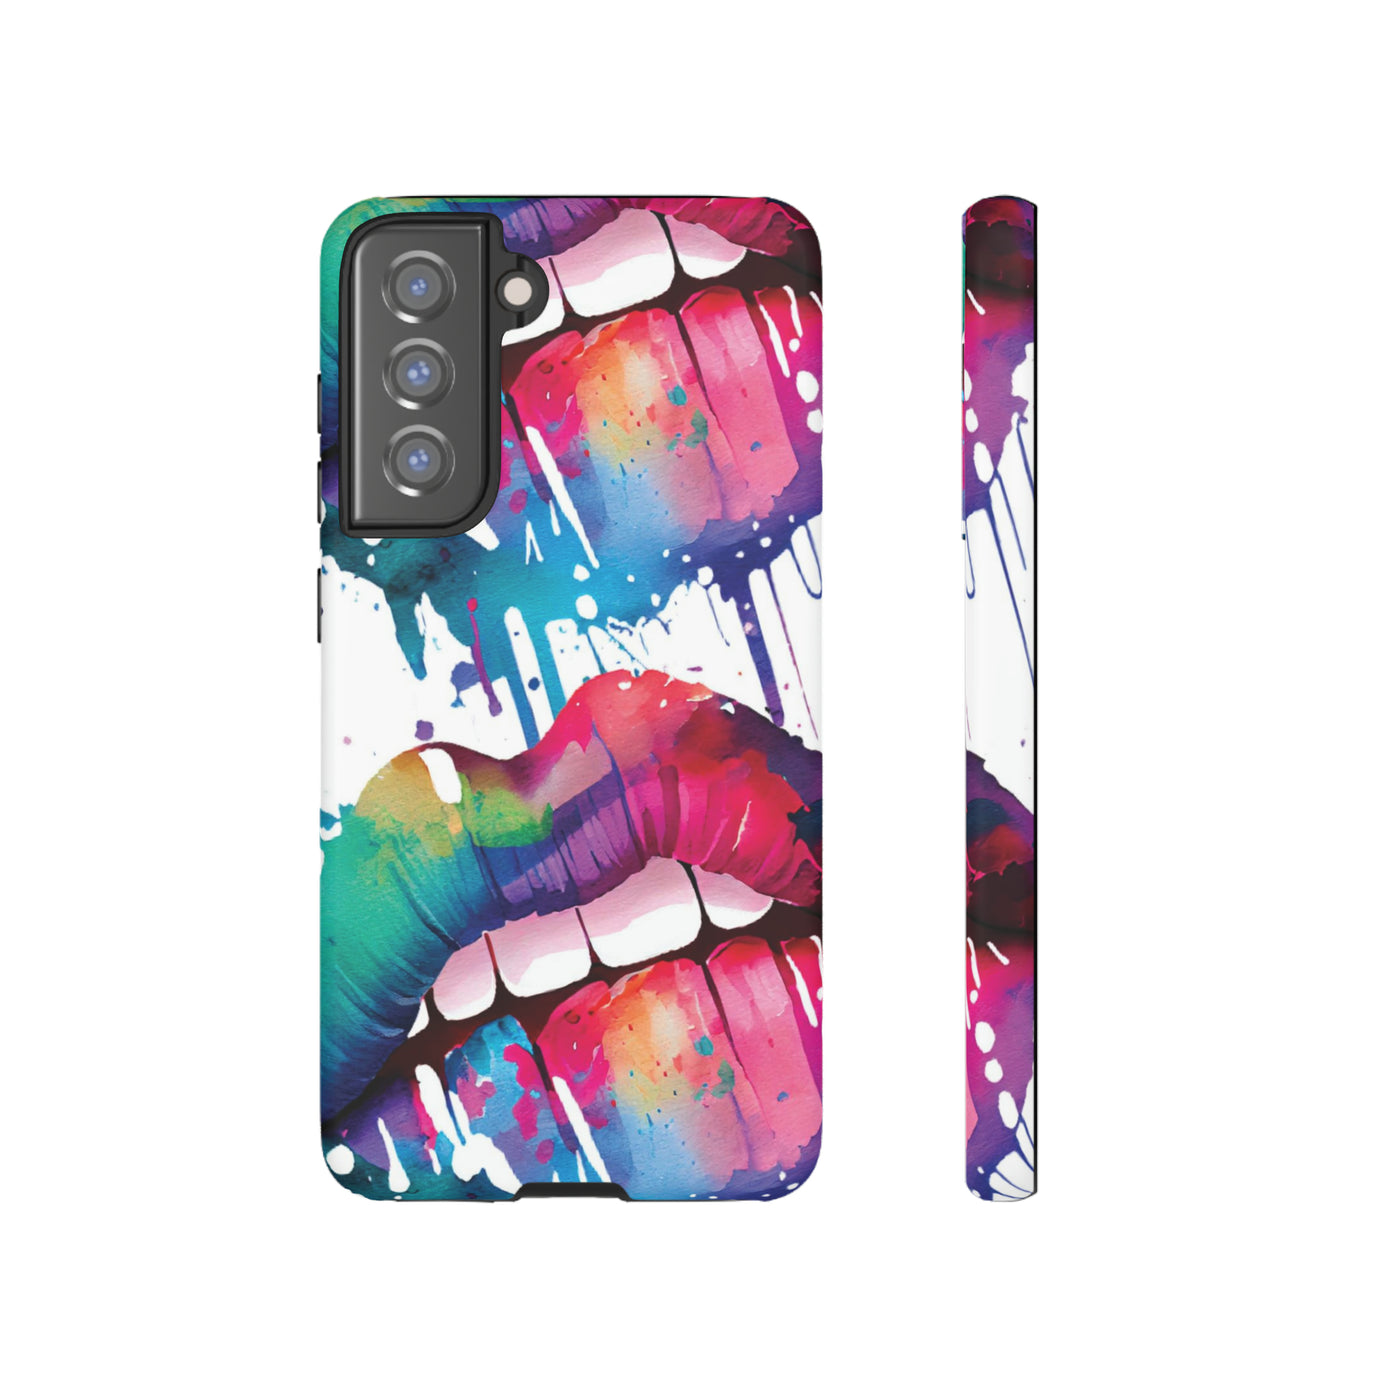 Cute Samsung Phone Case | Aesthetic Samsung Phone Case | Smile Lips Colorful | Galaxy S23, S22, S21, S20 | Luxury Double Layer | Cool